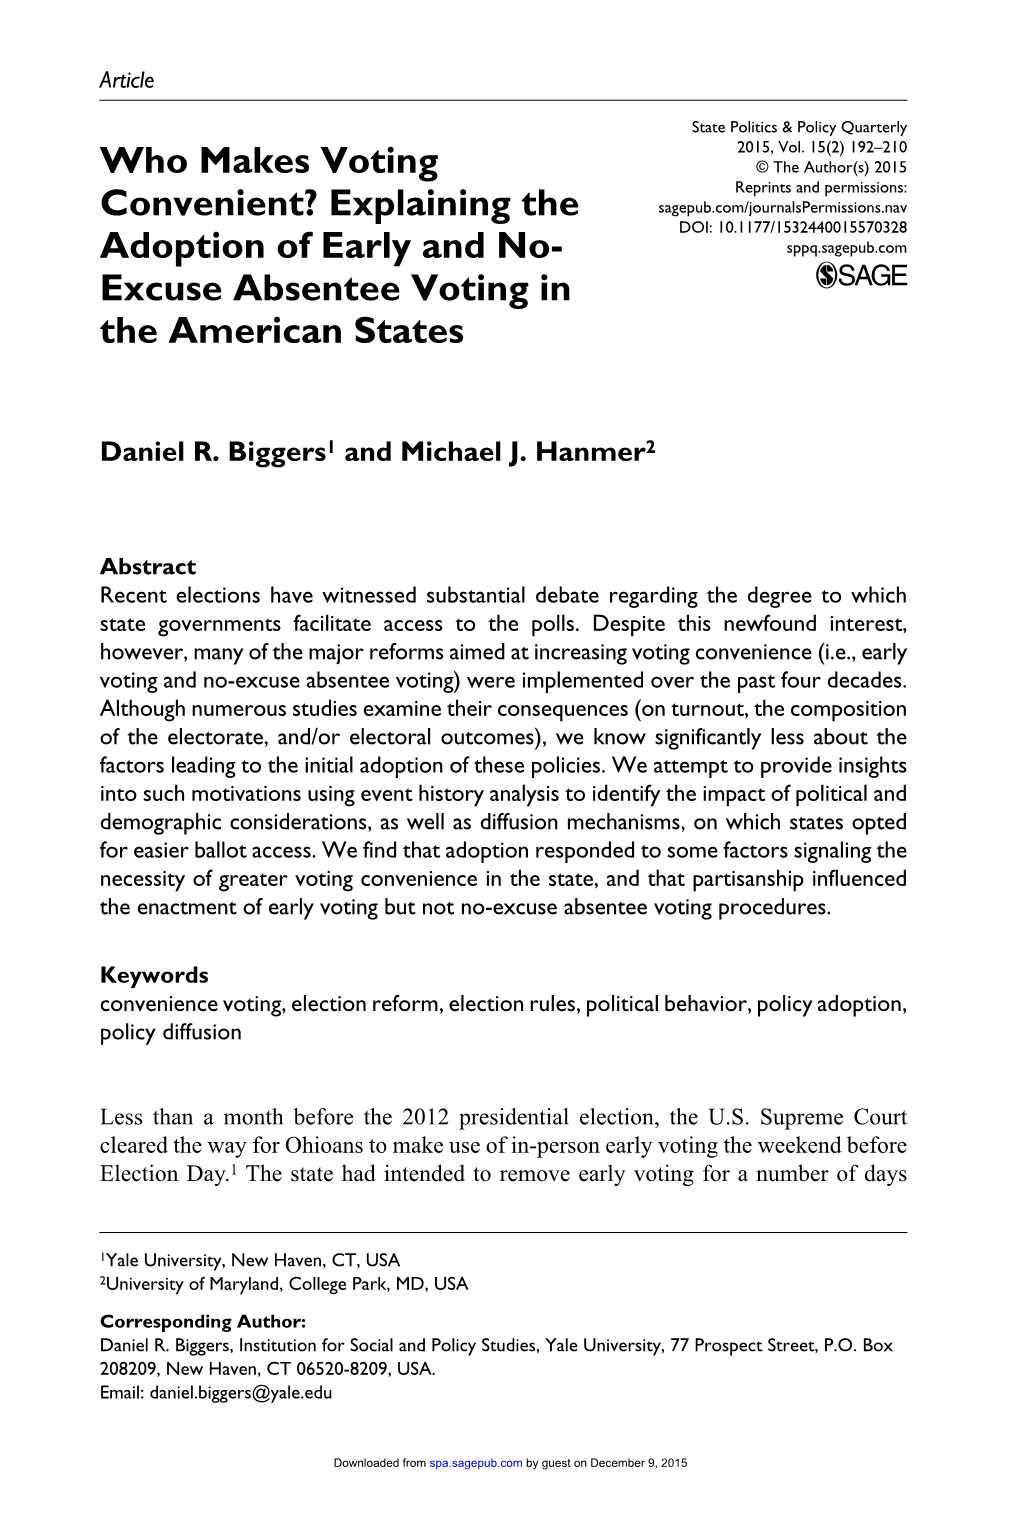 Who Makes Voting Convenient? Explaining the Adoption of Early and No- Excuse Absentee Voting in the American States